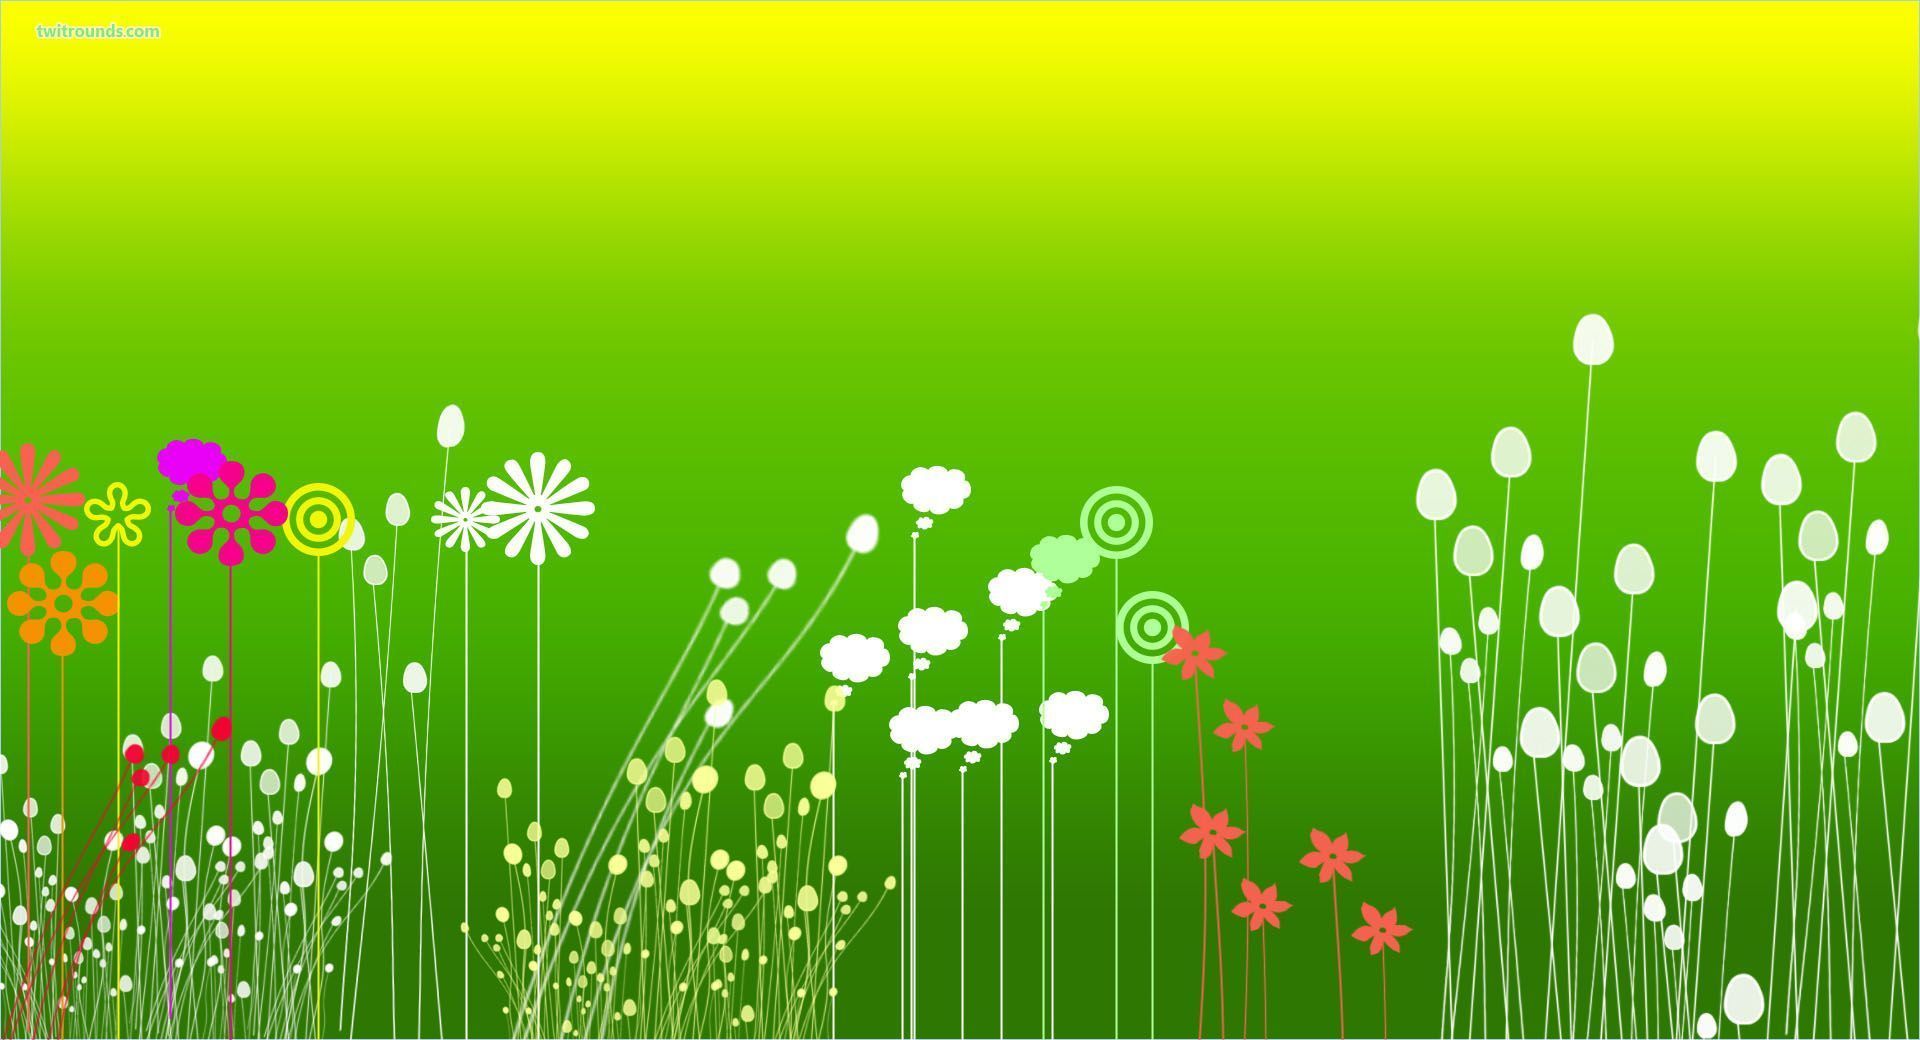 cartoon flower image and wallpaper Download